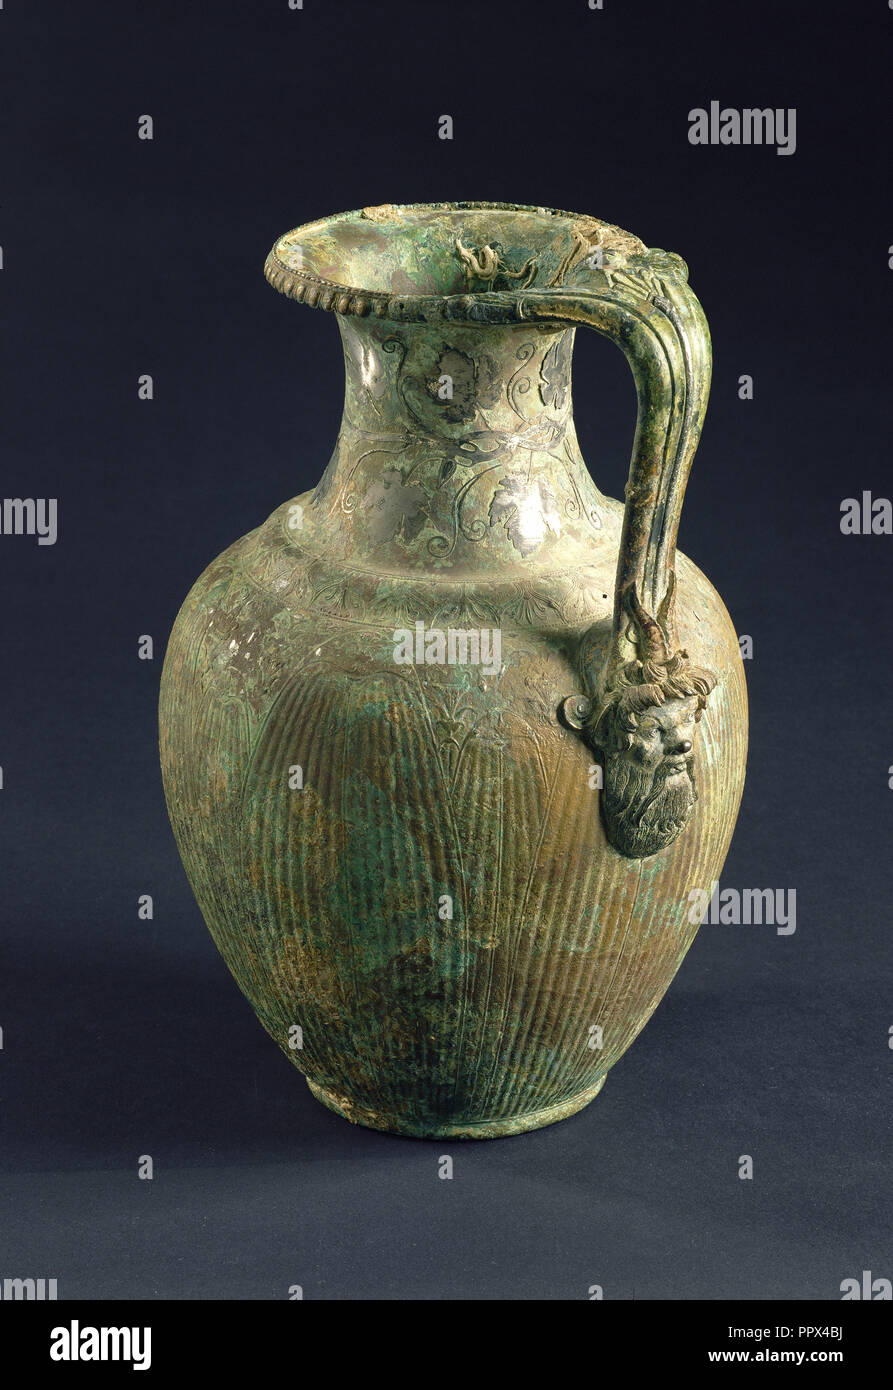 Pitcher with Bacchic Imagery; Alexandria, Egypt; 25 B.C. - A.D. 25; Bronze and silver; 32 × 22 × 20.3 cm Stock Photo